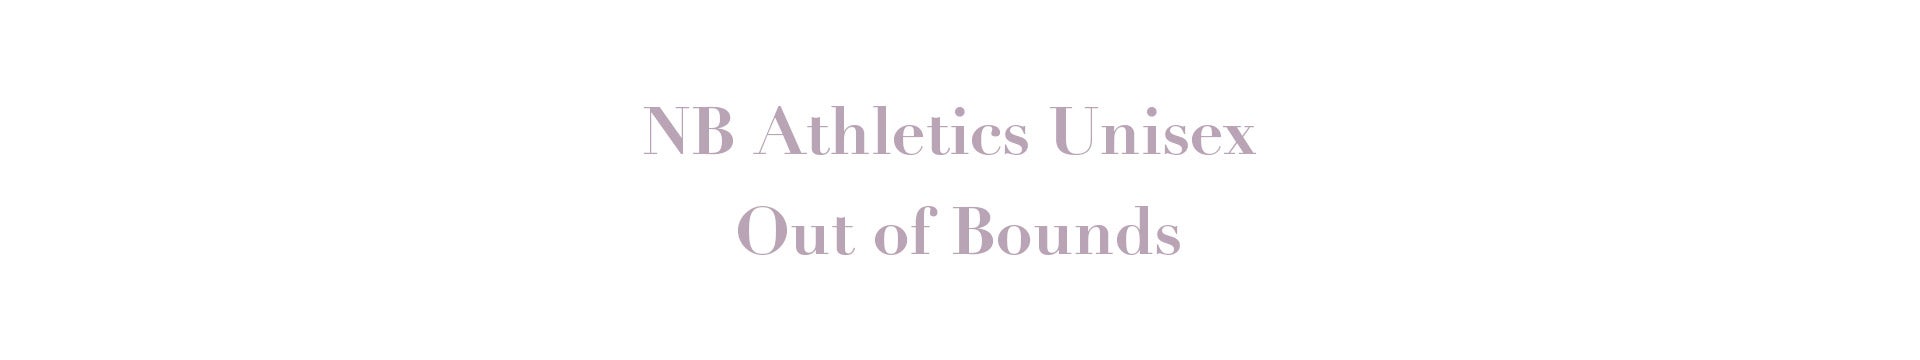 NB Athletics Unisex Out of Bounds